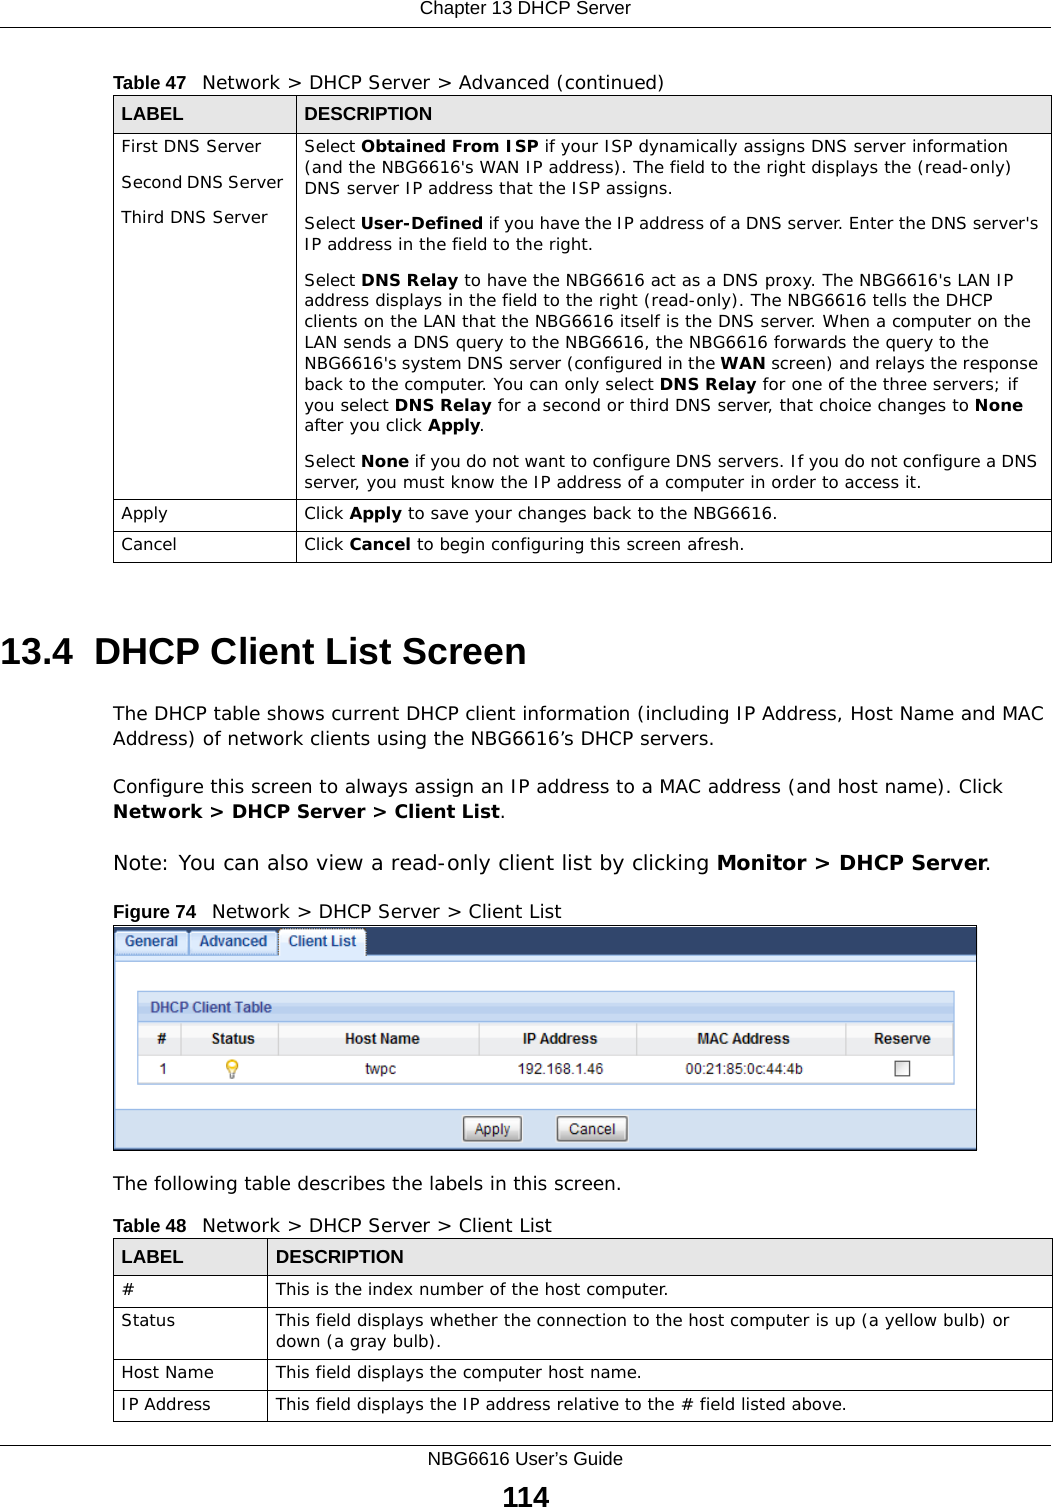 Chapter 13 DHCP ServerNBG6616 User’s Guide11413.4  DHCP Client List ScreenThe DHCP table shows current DHCP client information (including IP Address, Host Name and MAC Address) of network clients using the NBG6616’s DHCP servers.Configure this screen to always assign an IP address to a MAC address (and host name). Click Network &gt; DHCP Server &gt; Client List. Note: You can also view a read-only client list by clicking Monitor &gt; DHCP Server. Figure 74   Network &gt; DHCP Server &gt; Client ListThe following table describes the labels in this screen.First DNS ServerSecond DNS Server Third DNS ServerSelect Obtained From ISP if your ISP dynamically assigns DNS server information (and the NBG6616&apos;s WAN IP address). The field to the right displays the (read-only) DNS server IP address that the ISP assigns. Select User-Defined if you have the IP address of a DNS server. Enter the DNS server&apos;s IP address in the field to the right.  Select DNS Relay to have the NBG6616 act as a DNS proxy. The NBG6616&apos;s LAN IP address displays in the field to the right (read-only). The NBG6616 tells the DHCP clients on the LAN that the NBG6616 itself is the DNS server. When a computer on the LAN sends a DNS query to the NBG6616, the NBG6616 forwards the query to the NBG6616&apos;s system DNS server (configured in the WAN screen) and relays the response back to the computer. You can only select DNS Relay for one of the three servers; if you select DNS Relay for a second or third DNS server, that choice changes to None after you click Apply. Select None if you do not want to configure DNS servers. If you do not configure a DNS server, you must know the IP address of a computer in order to access it.Apply Click Apply to save your changes back to the NBG6616.Cancel Click Cancel to begin configuring this screen afresh.Table 47   Network &gt; DHCP Server &gt; Advanced (continued)LABEL DESCRIPTIONTable 48   Network &gt; DHCP Server &gt; Client ListLABEL  DESCRIPTION#  This is the index number of the host computer.Status This field displays whether the connection to the host computer is up (a yellow bulb) or down (a gray bulb).Host Name This field displays the computer host name.IP Address This field displays the IP address relative to the # field listed above.